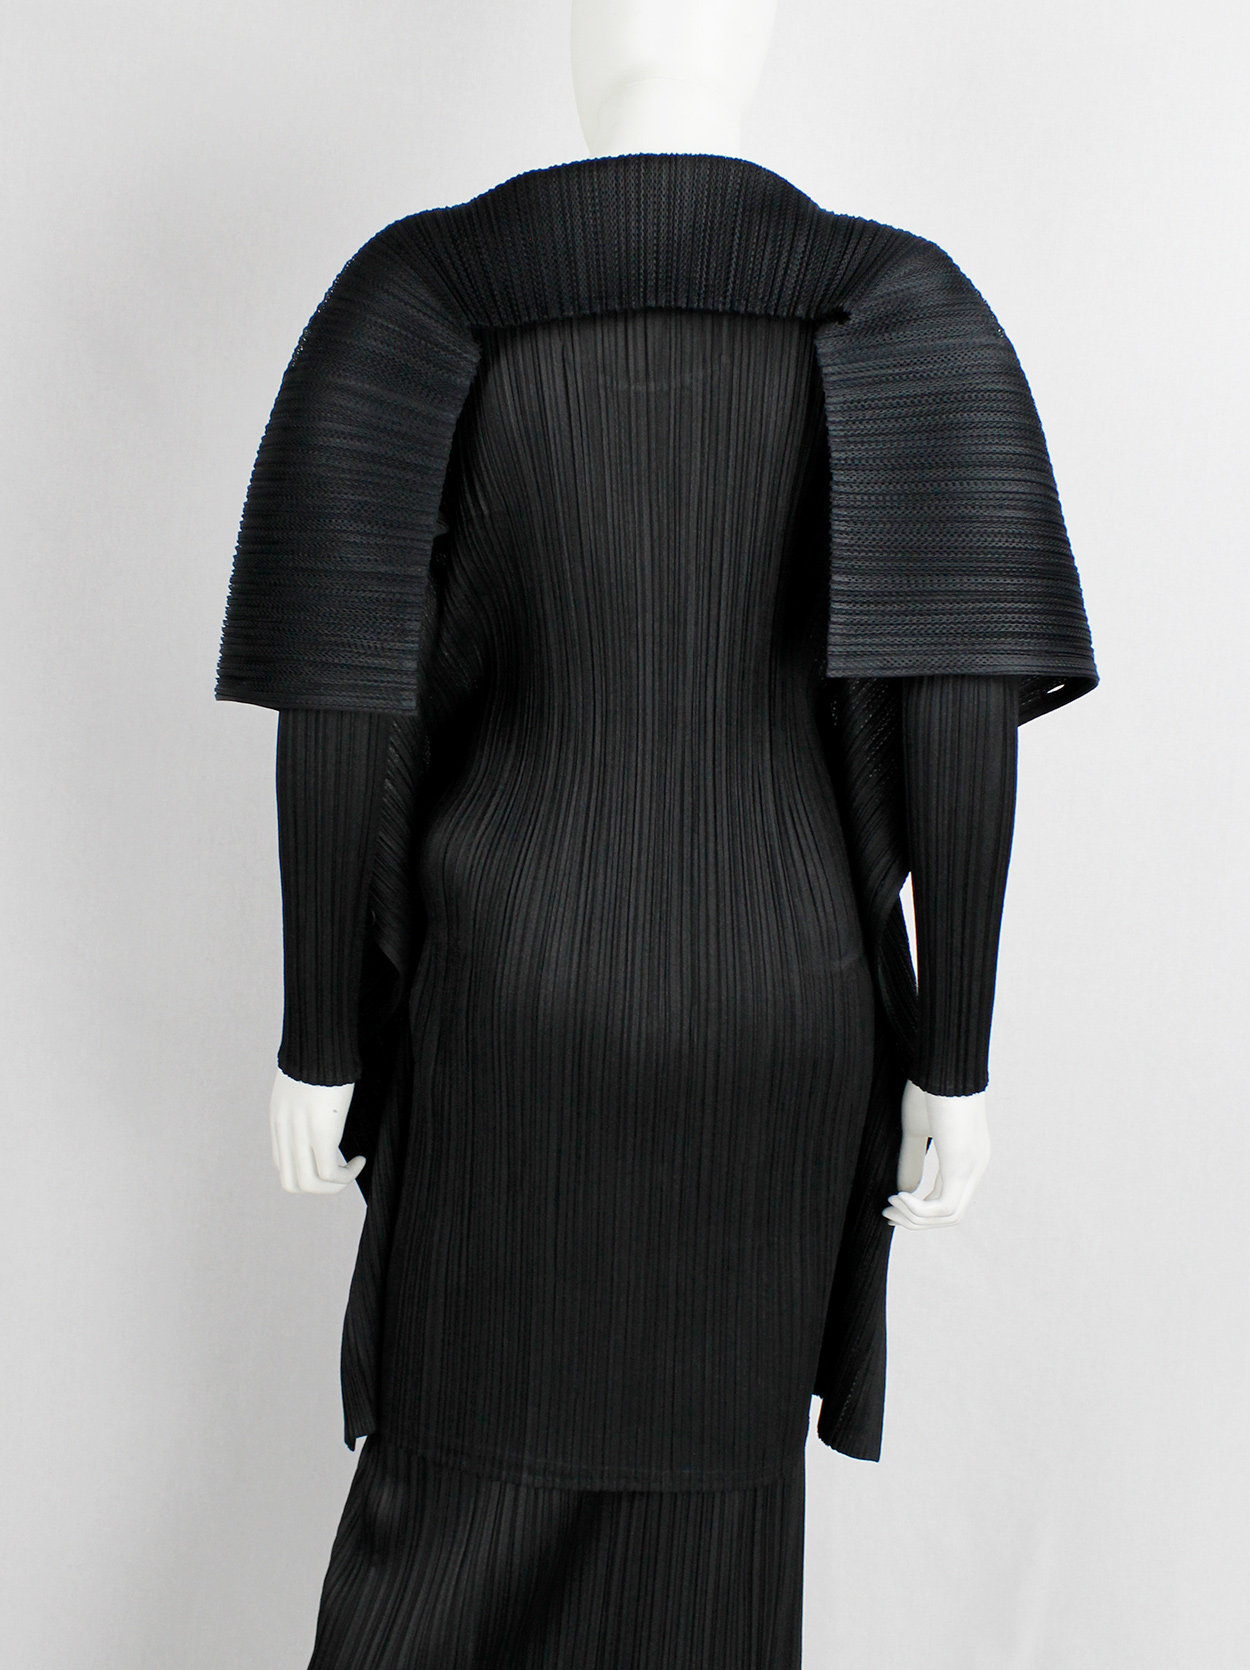 Issey Miyake Pleats Please black square jumper buttoned into a folded ...